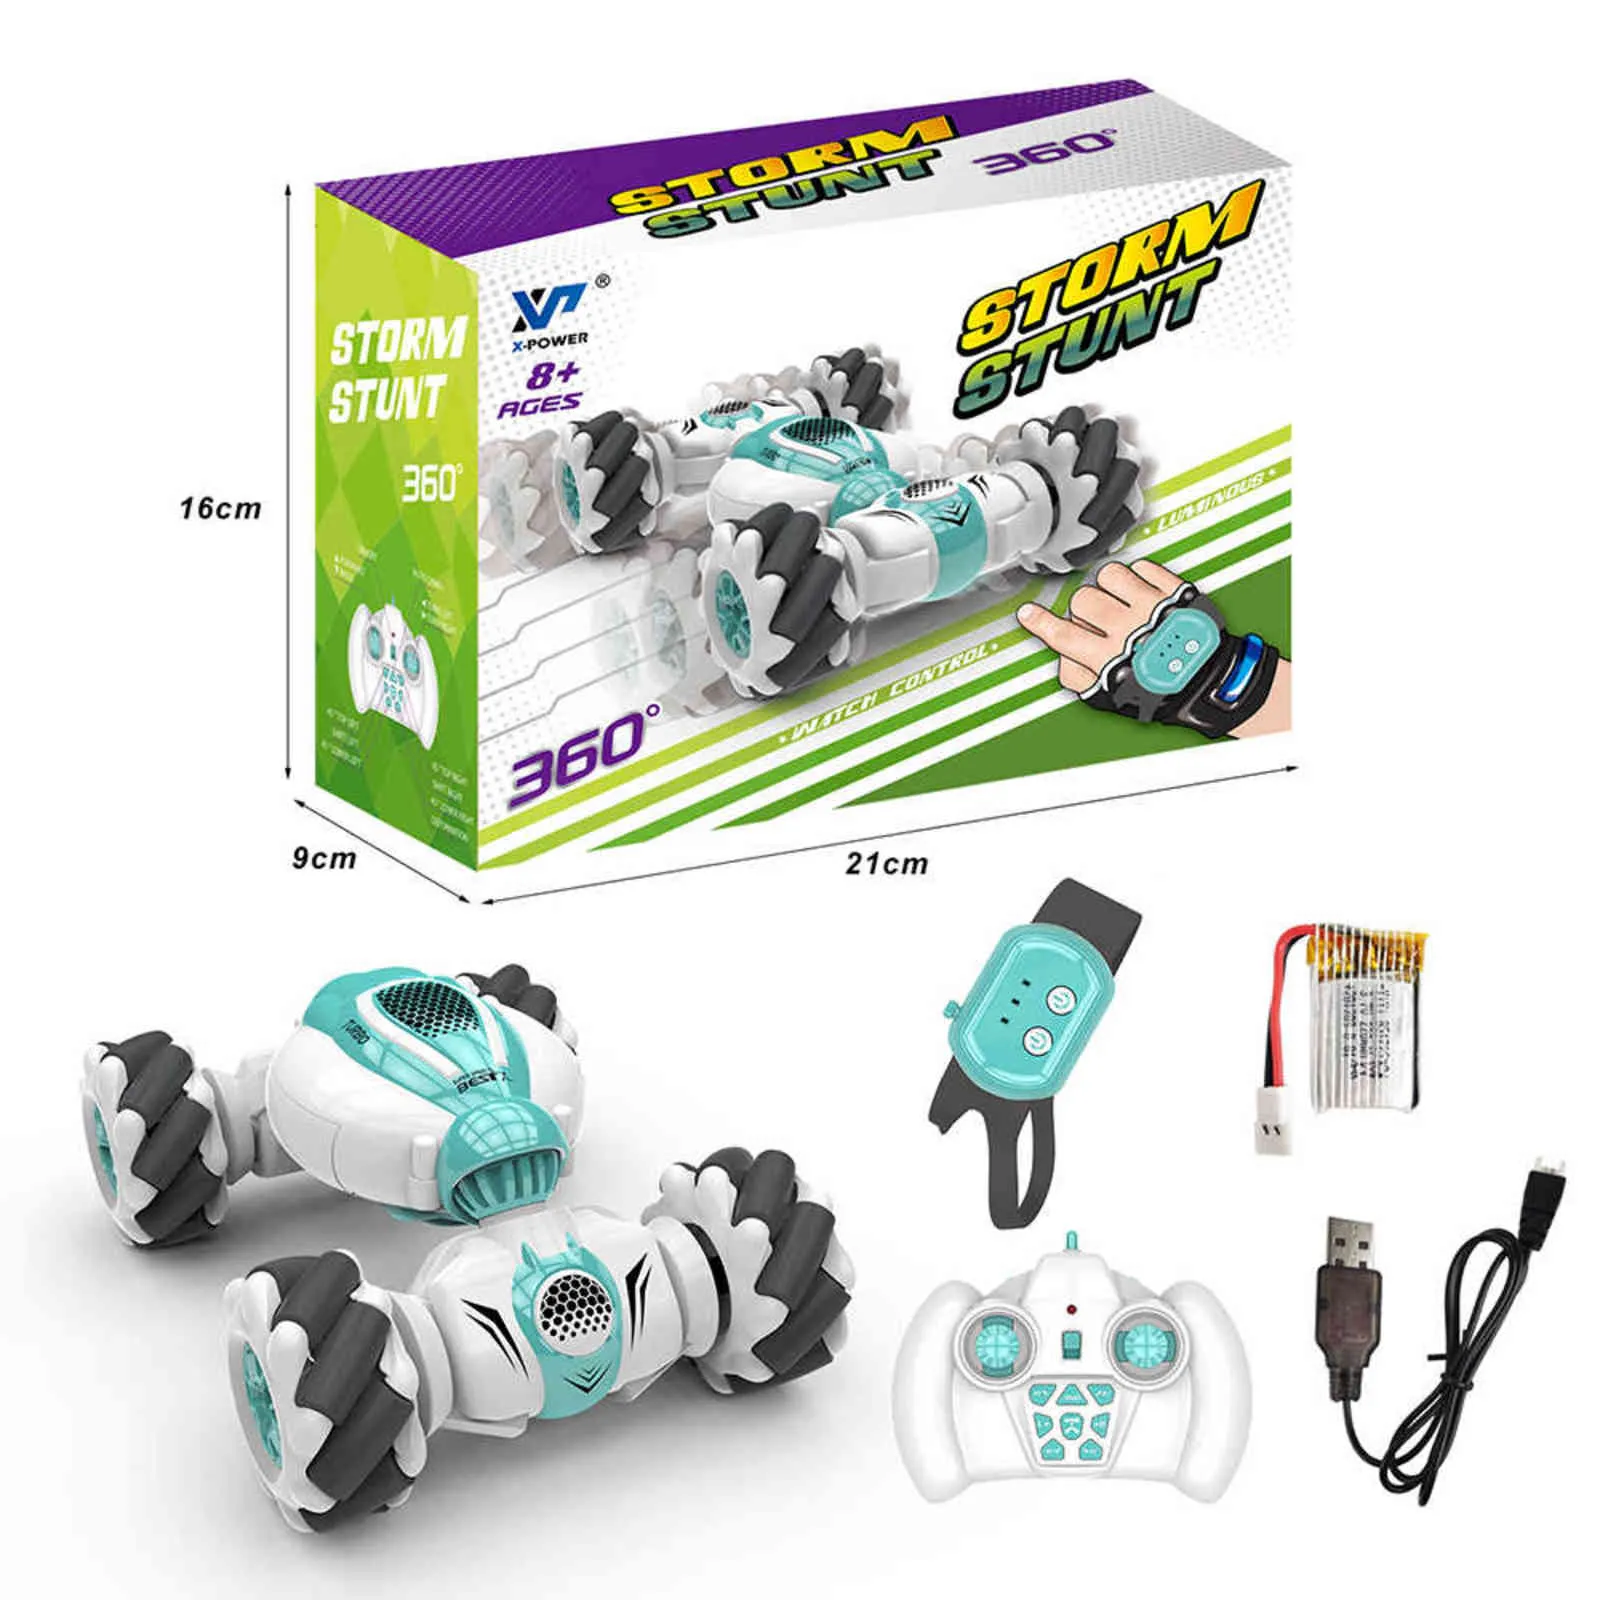 RC STUNT CAR 4WD 1/16 GESTURE INDUCTION Twisting Drift Off-Road 360 Degree Flip Remote Control Drive Vehicle Toy vs D876 211029